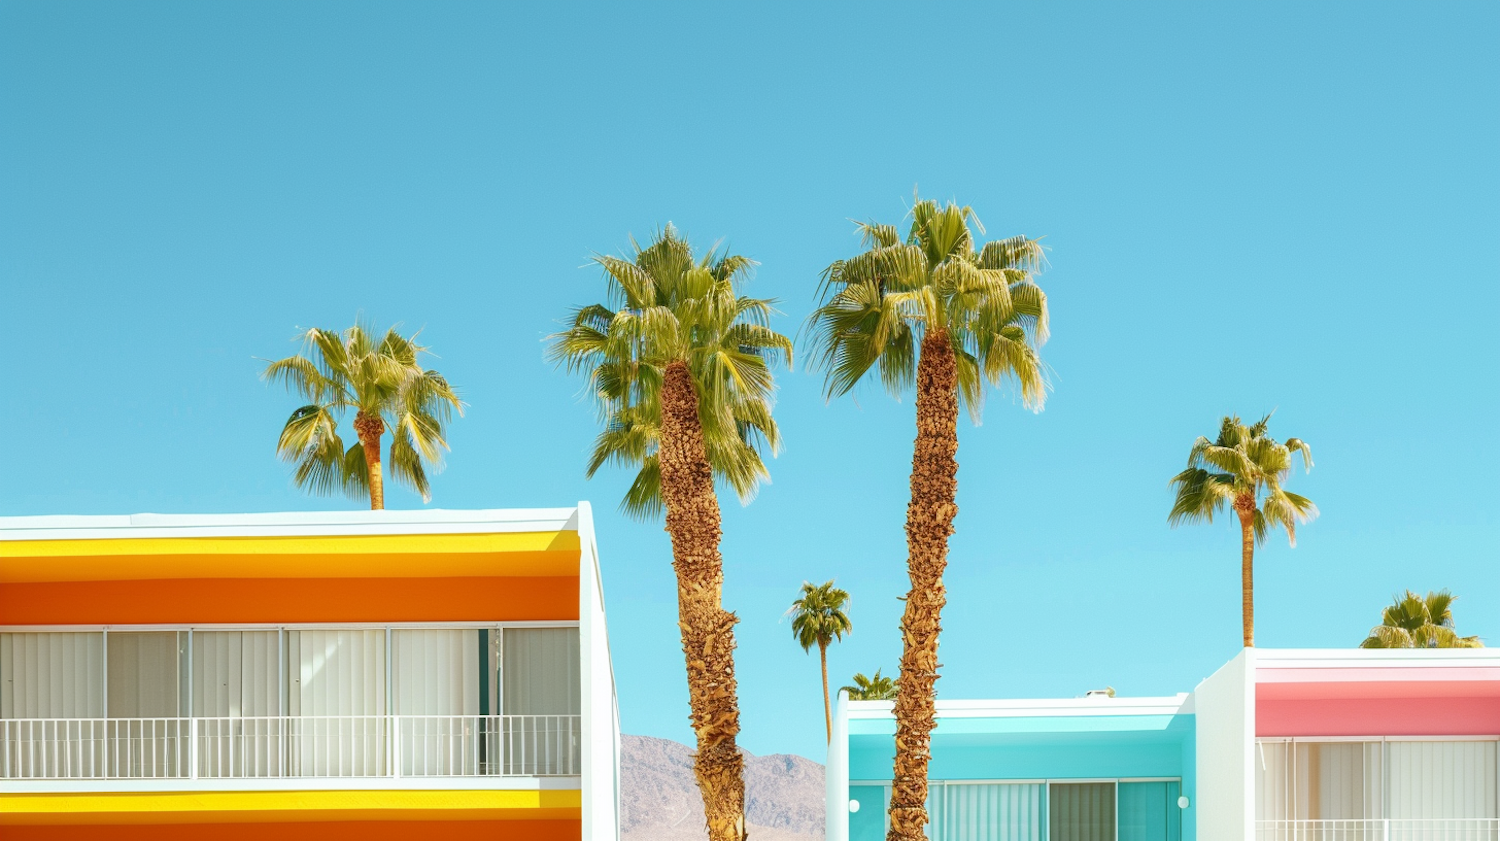 Mid-Century Modern Architecture and Palms